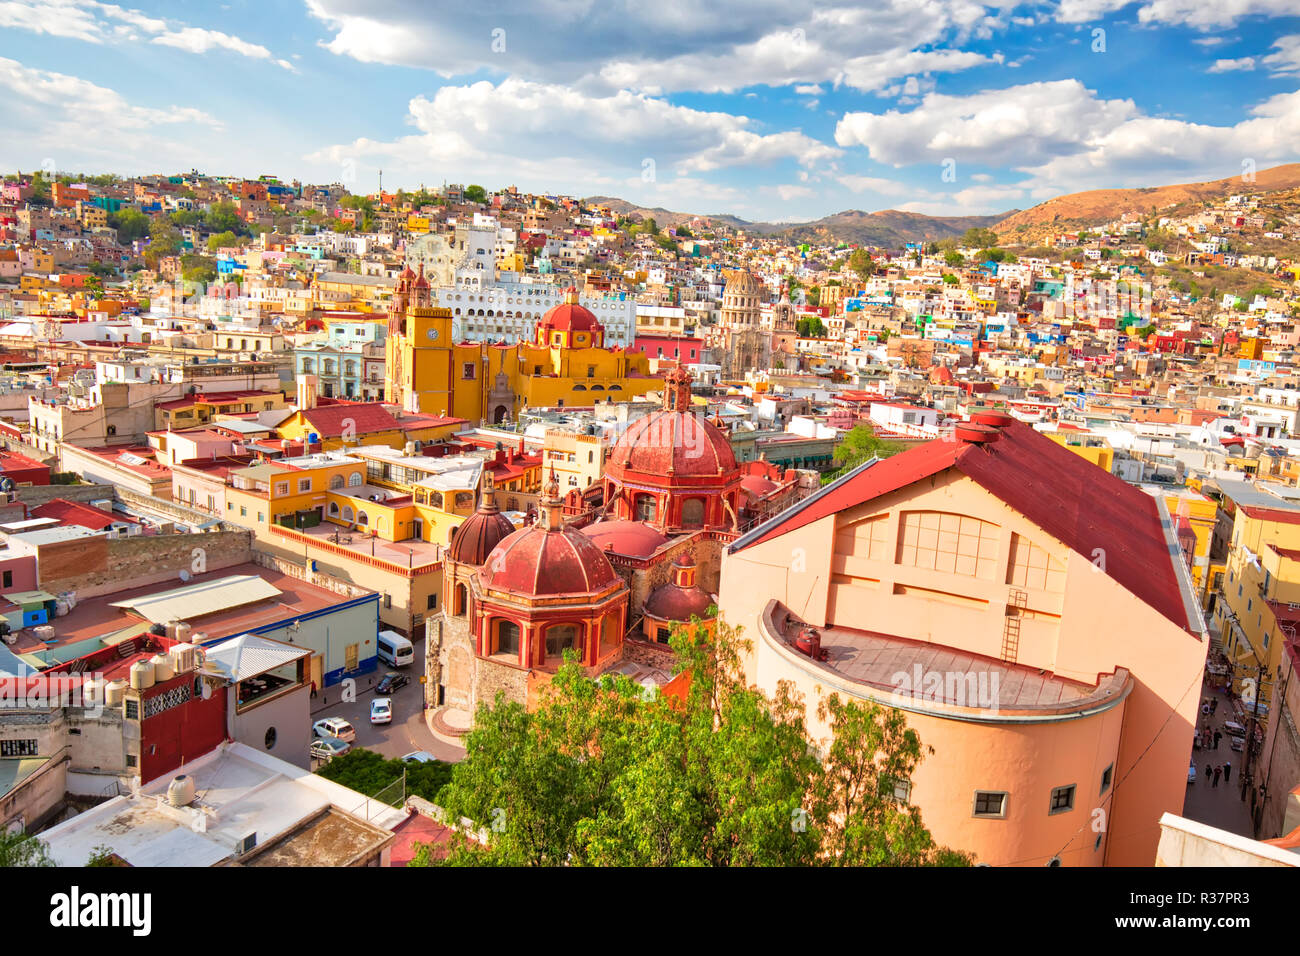 Guanajuato, scenic city lookout and panoramic views from city funicular Stock Photo